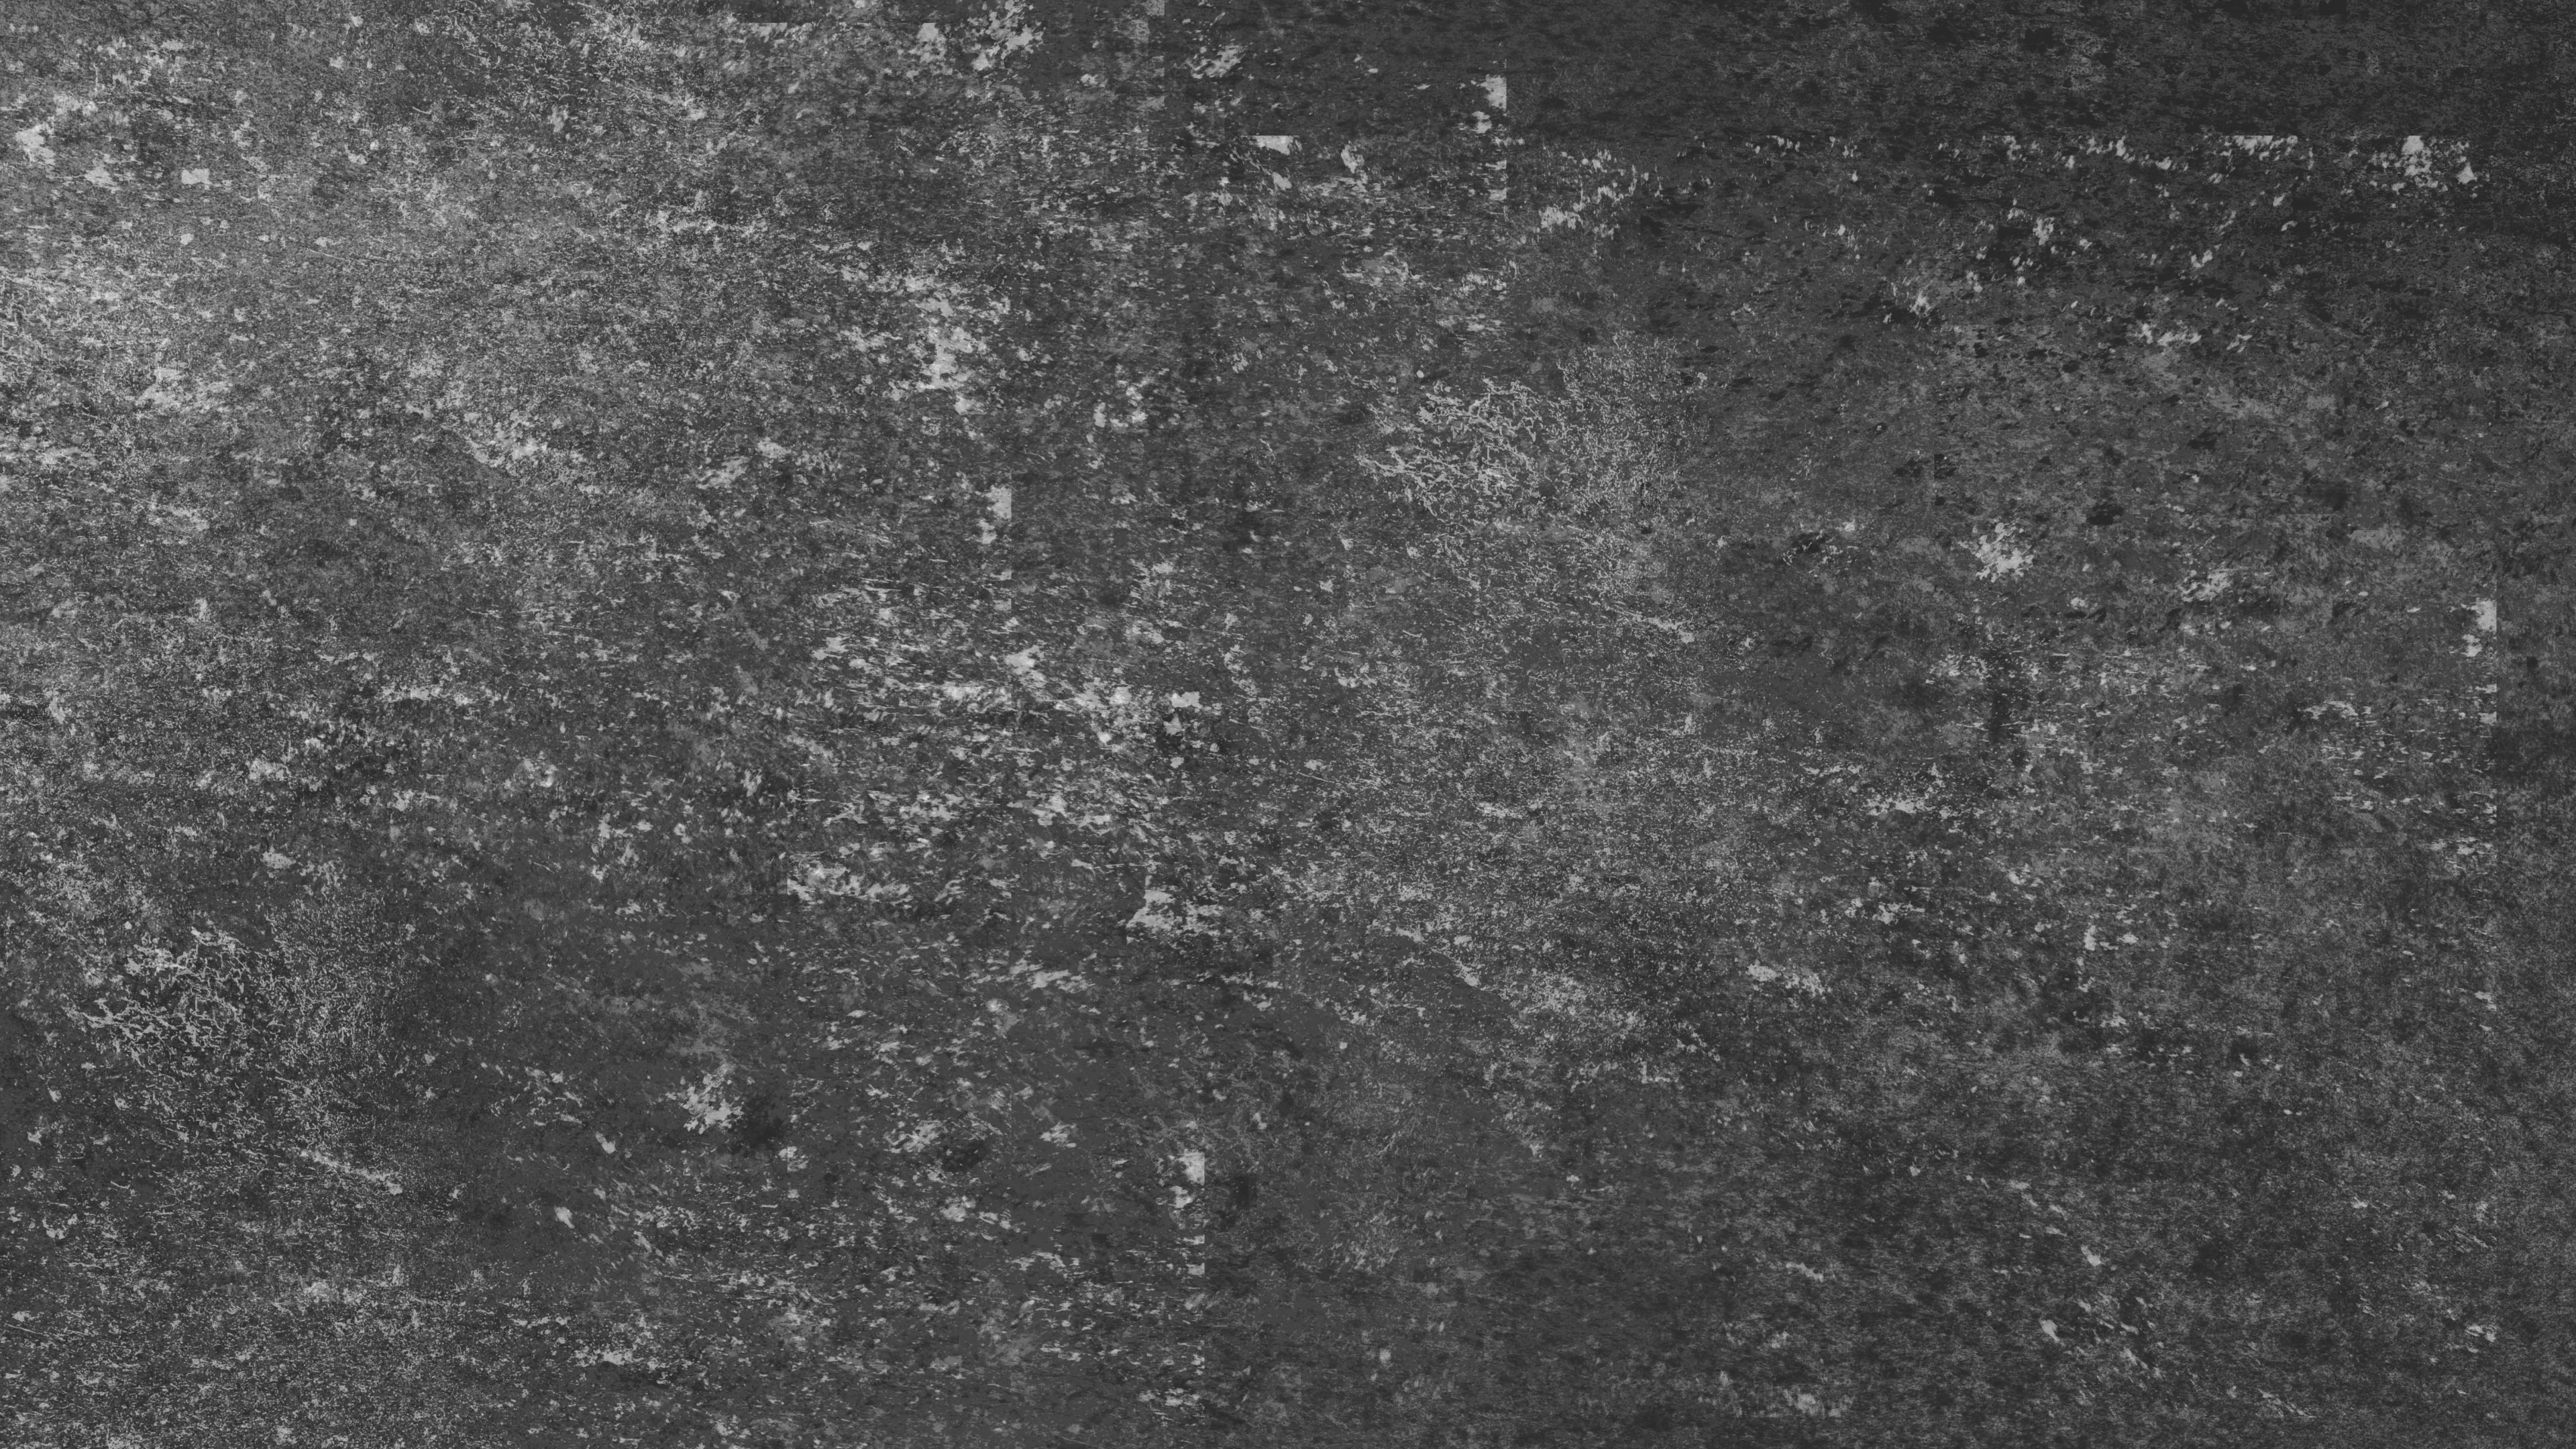 Rock surface texture background grey and black color